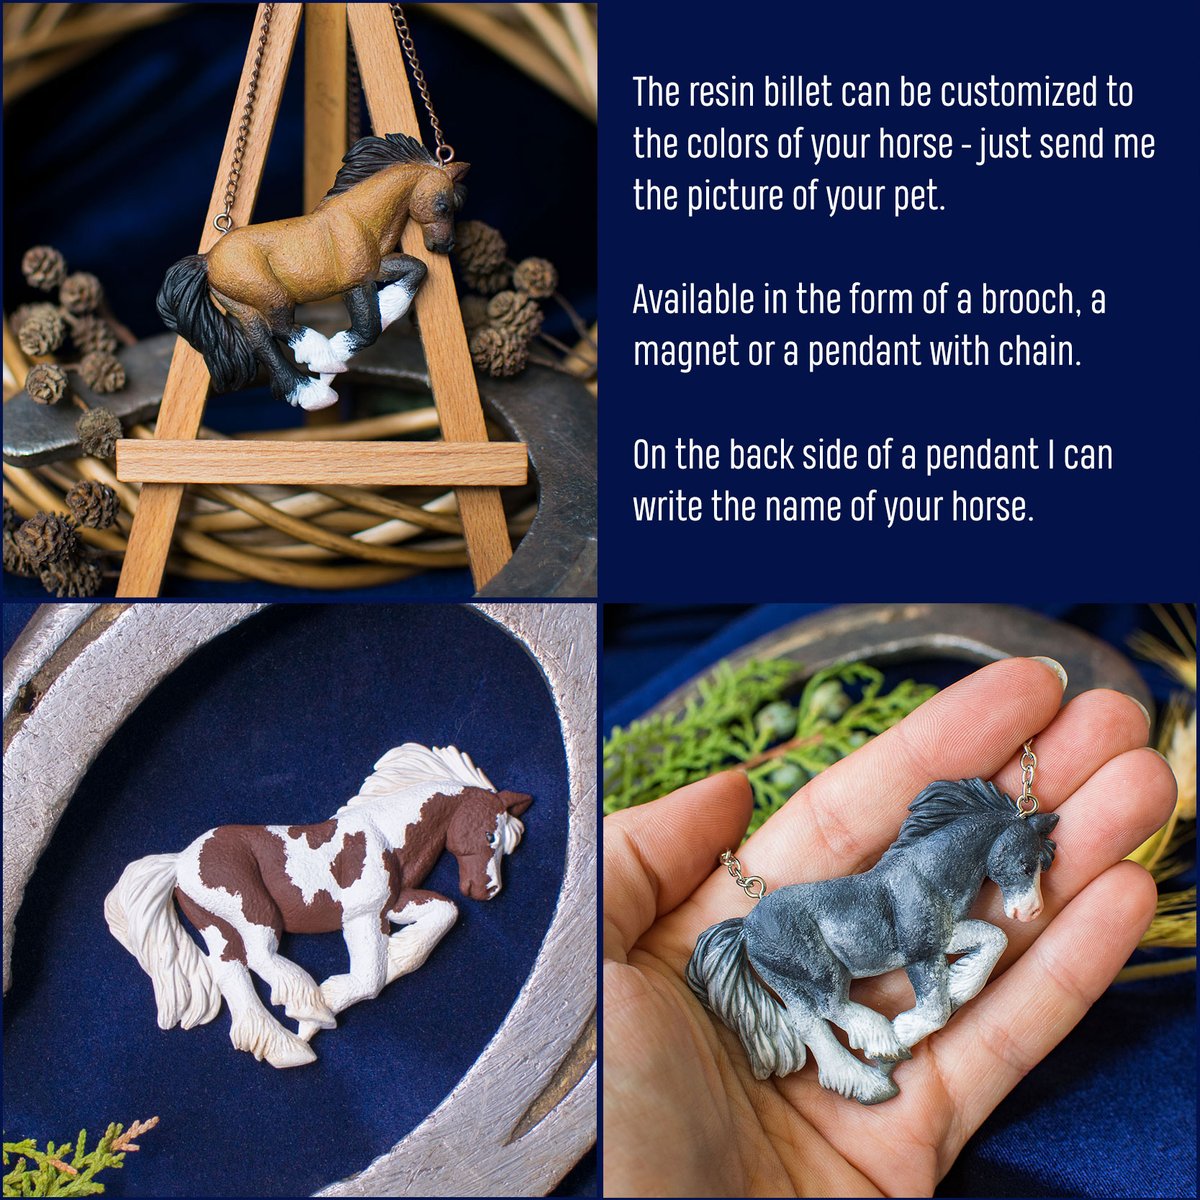 Moreover, these pendants with horses can serve as a memorial for a four-legged friend who has crossed the rainbow bridge. I can paint a billet in the color of your #horse - just show me a photo. 
It can be made as a pendant on a chain, a brooch, or a fridge magnet.